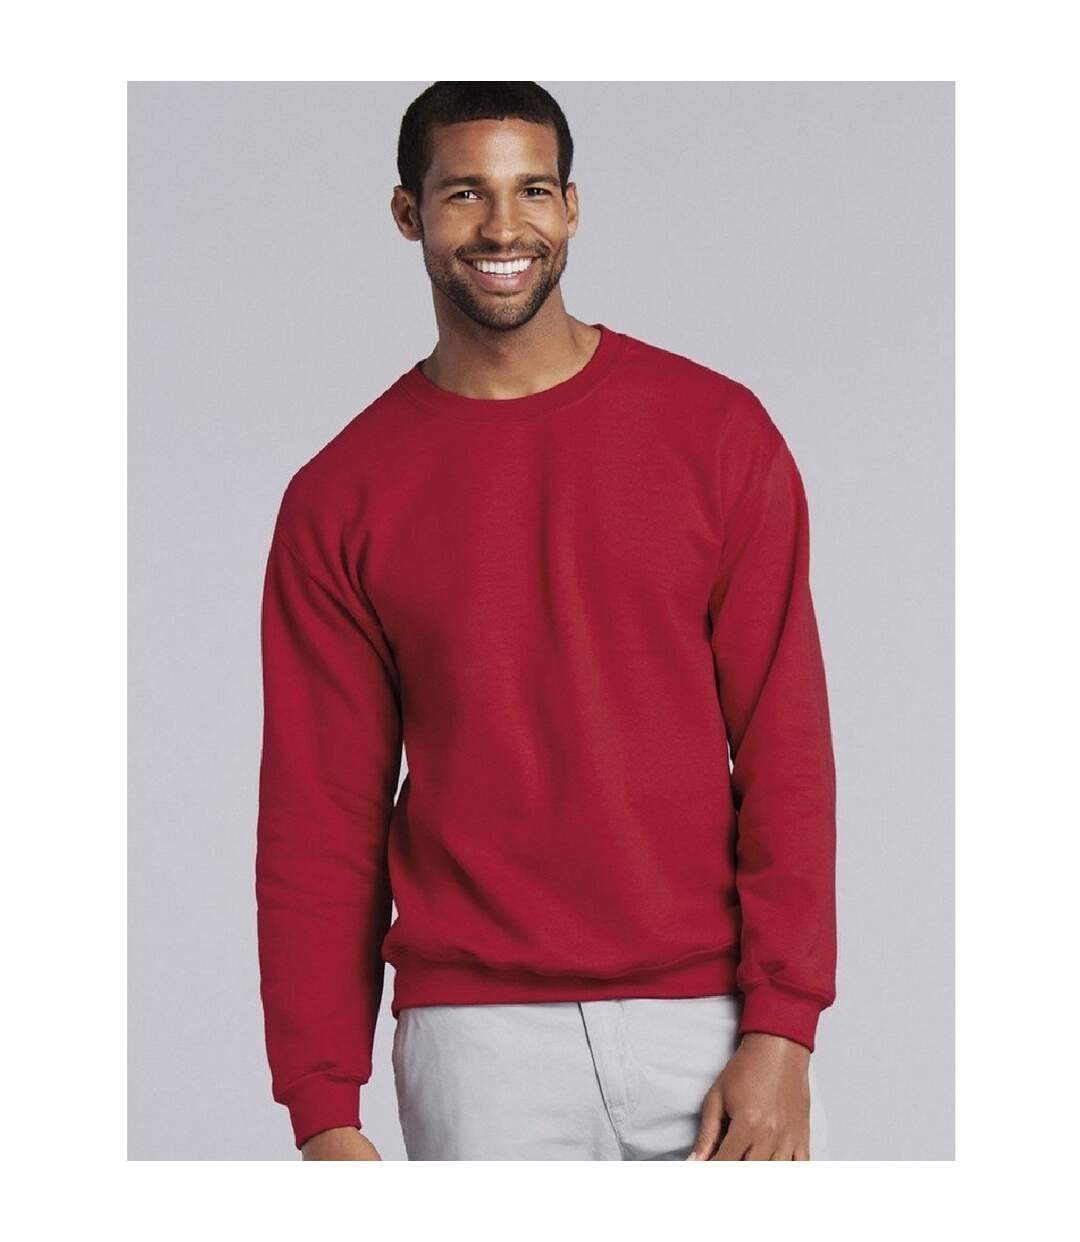 Fruit Of The Loom - Sweat - Homme (Rouge chiné) - UTBC365